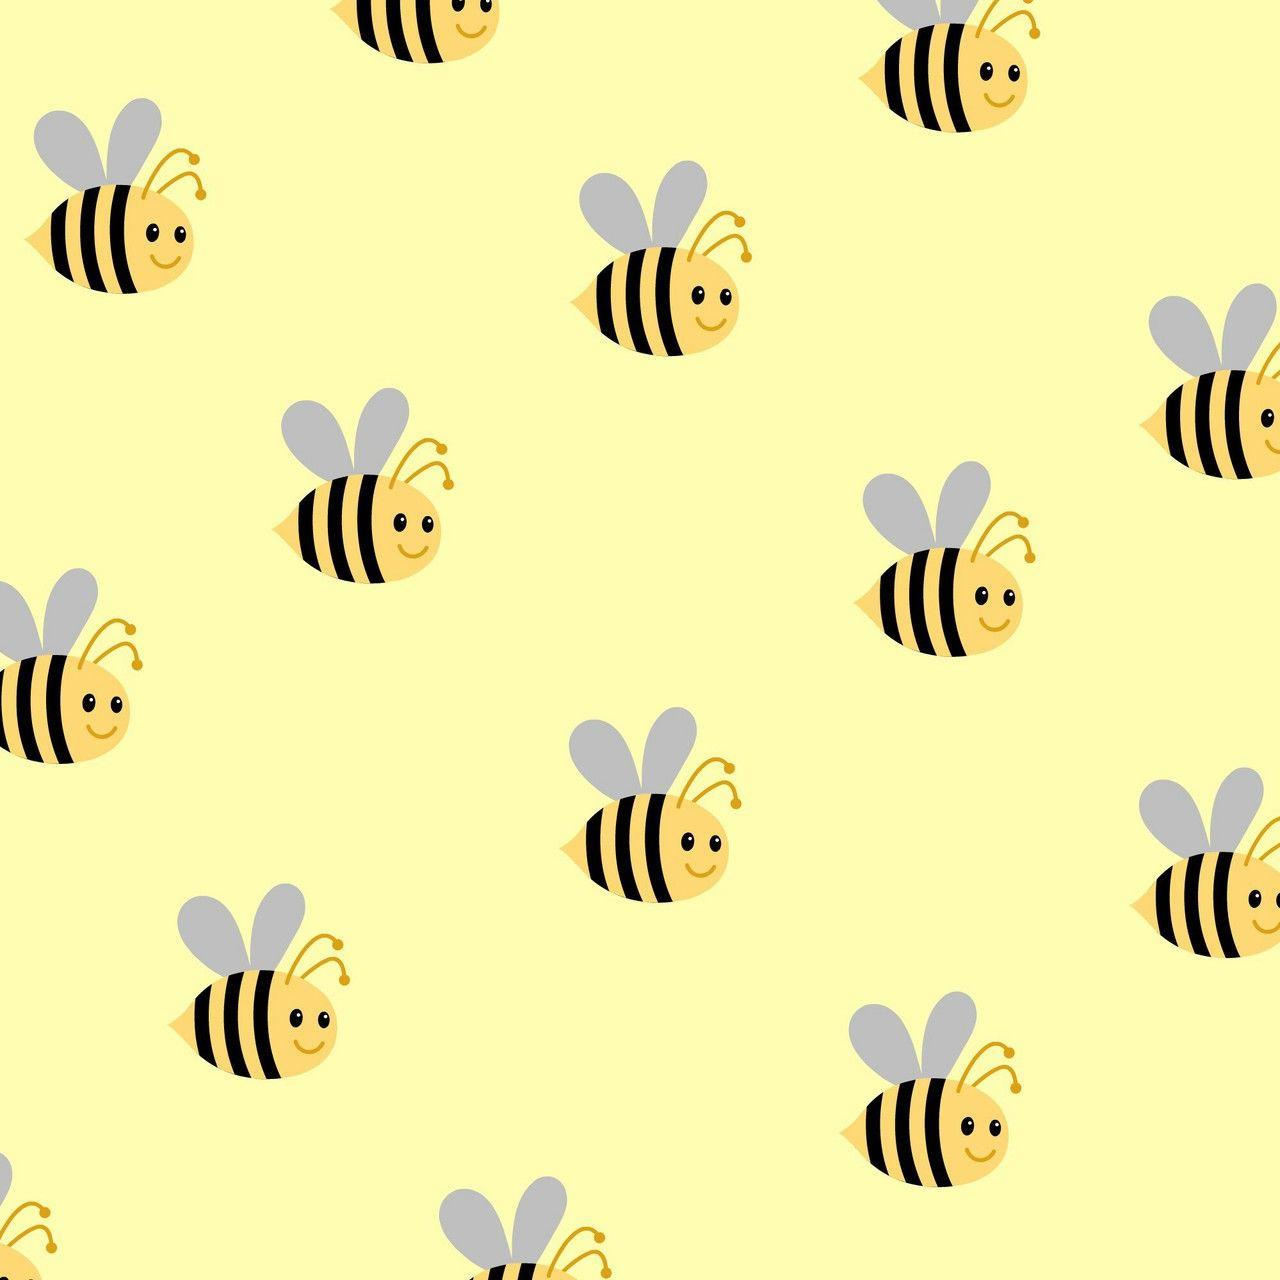 Bees background shared by sheeta ♥